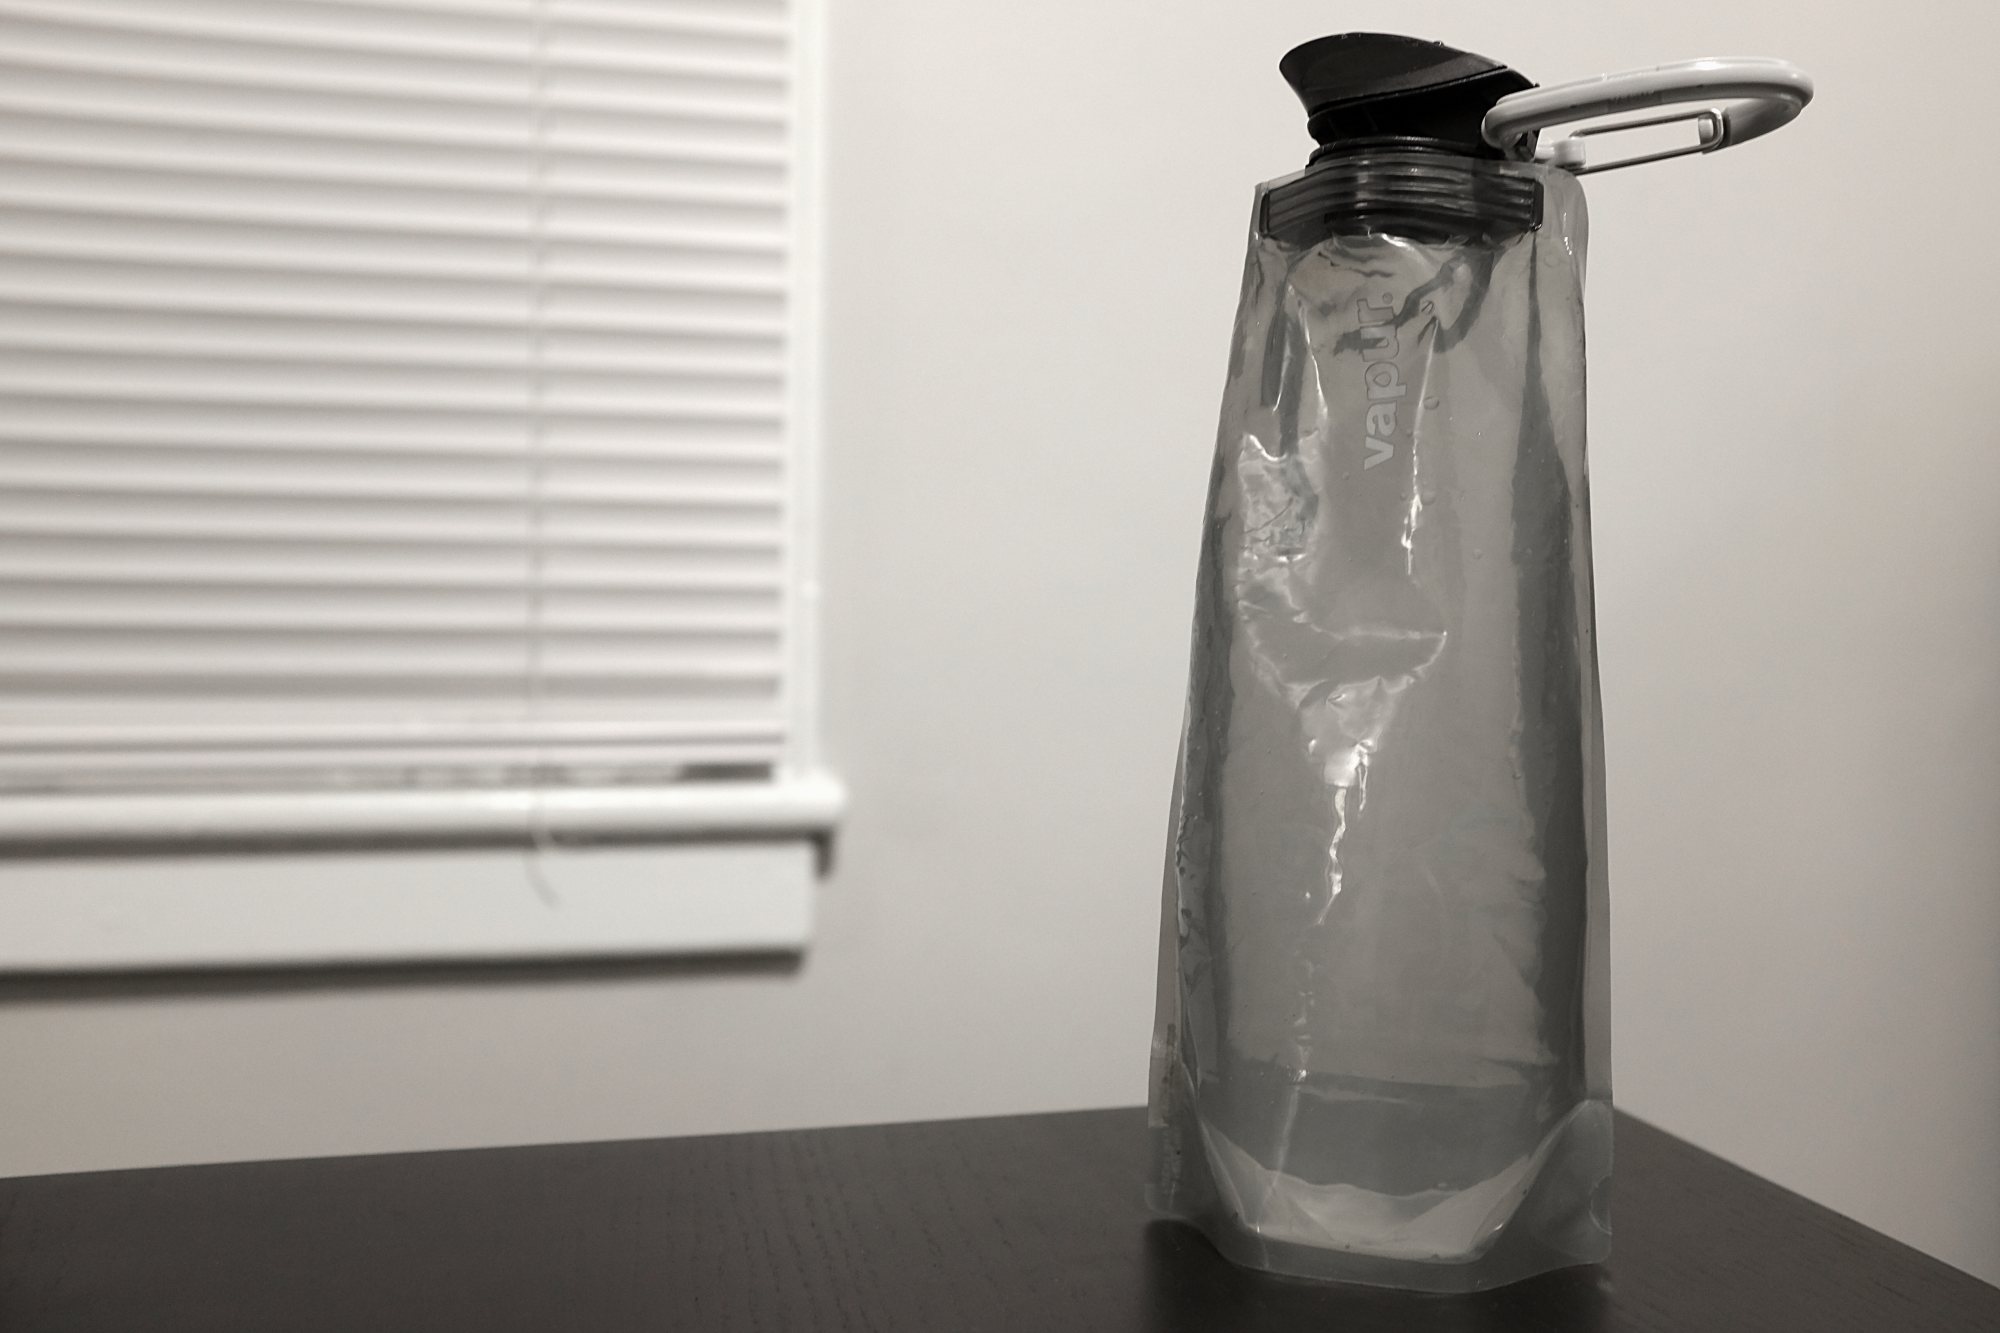 a vapur water bottle sits on a table